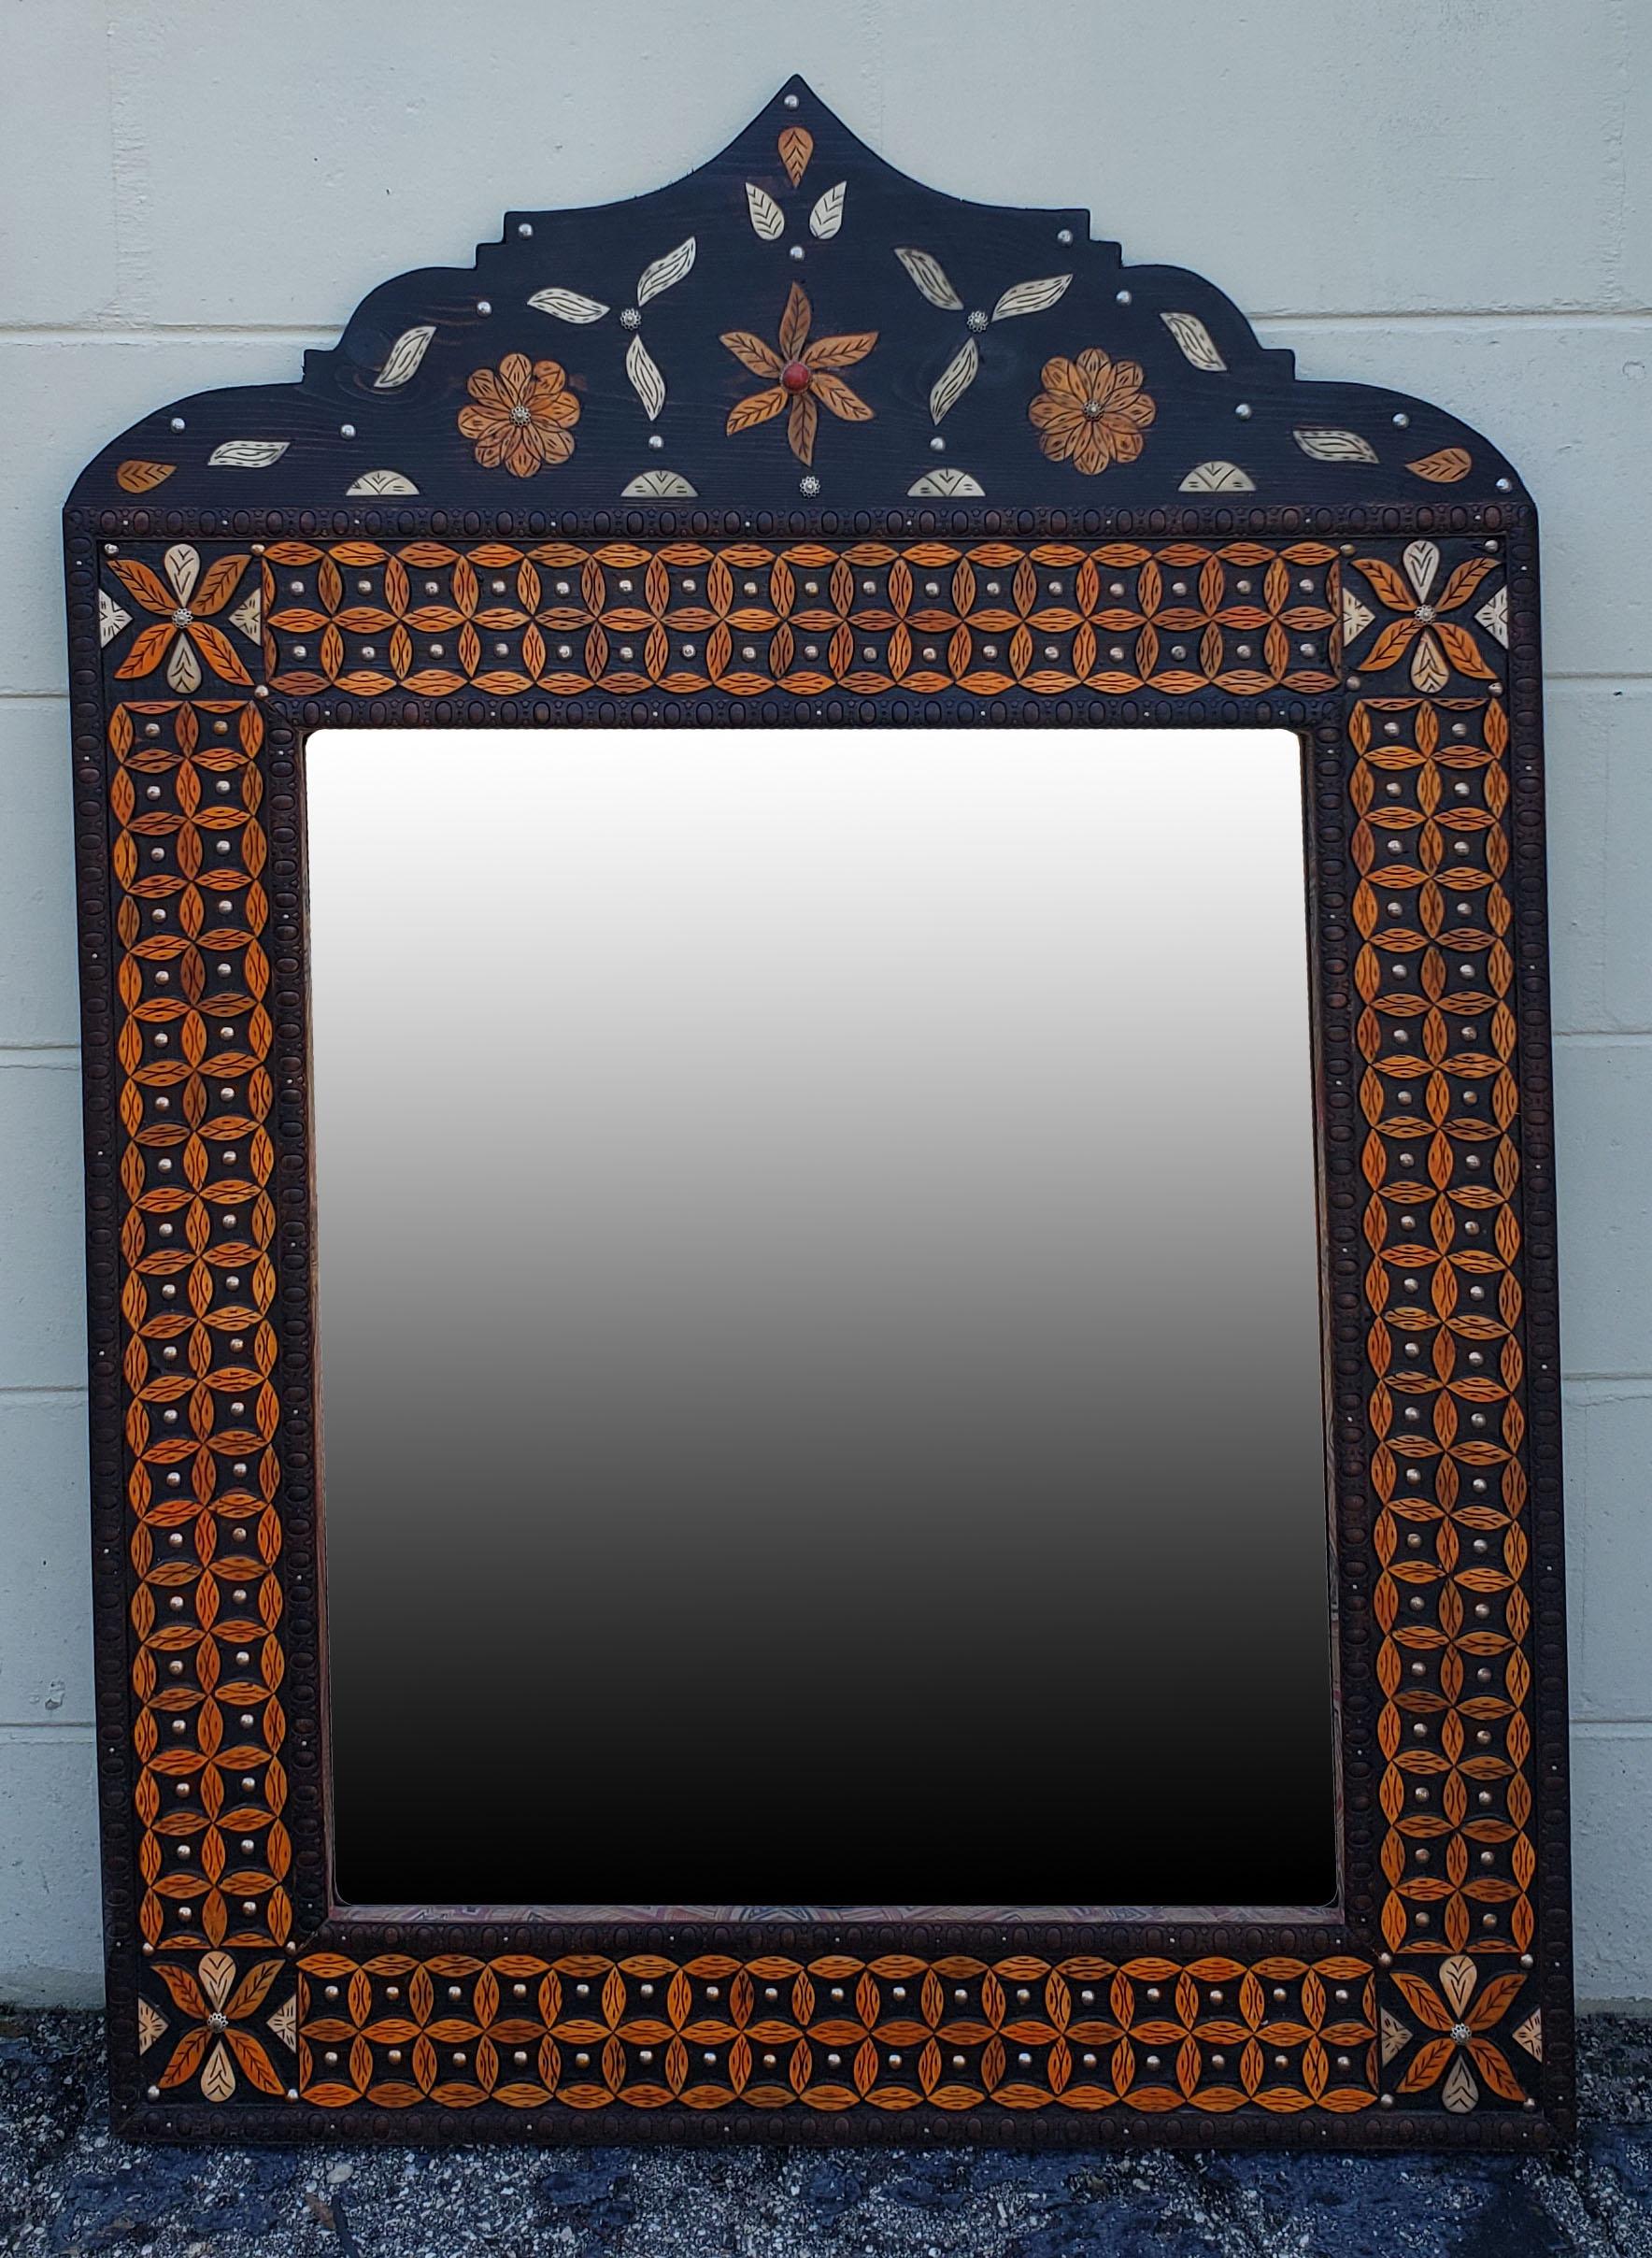 Medium size metal and camel bone inlay Moroccan mirror. Made in the city of Marrakech, this mirror is dome shaped, and measures approximately 43